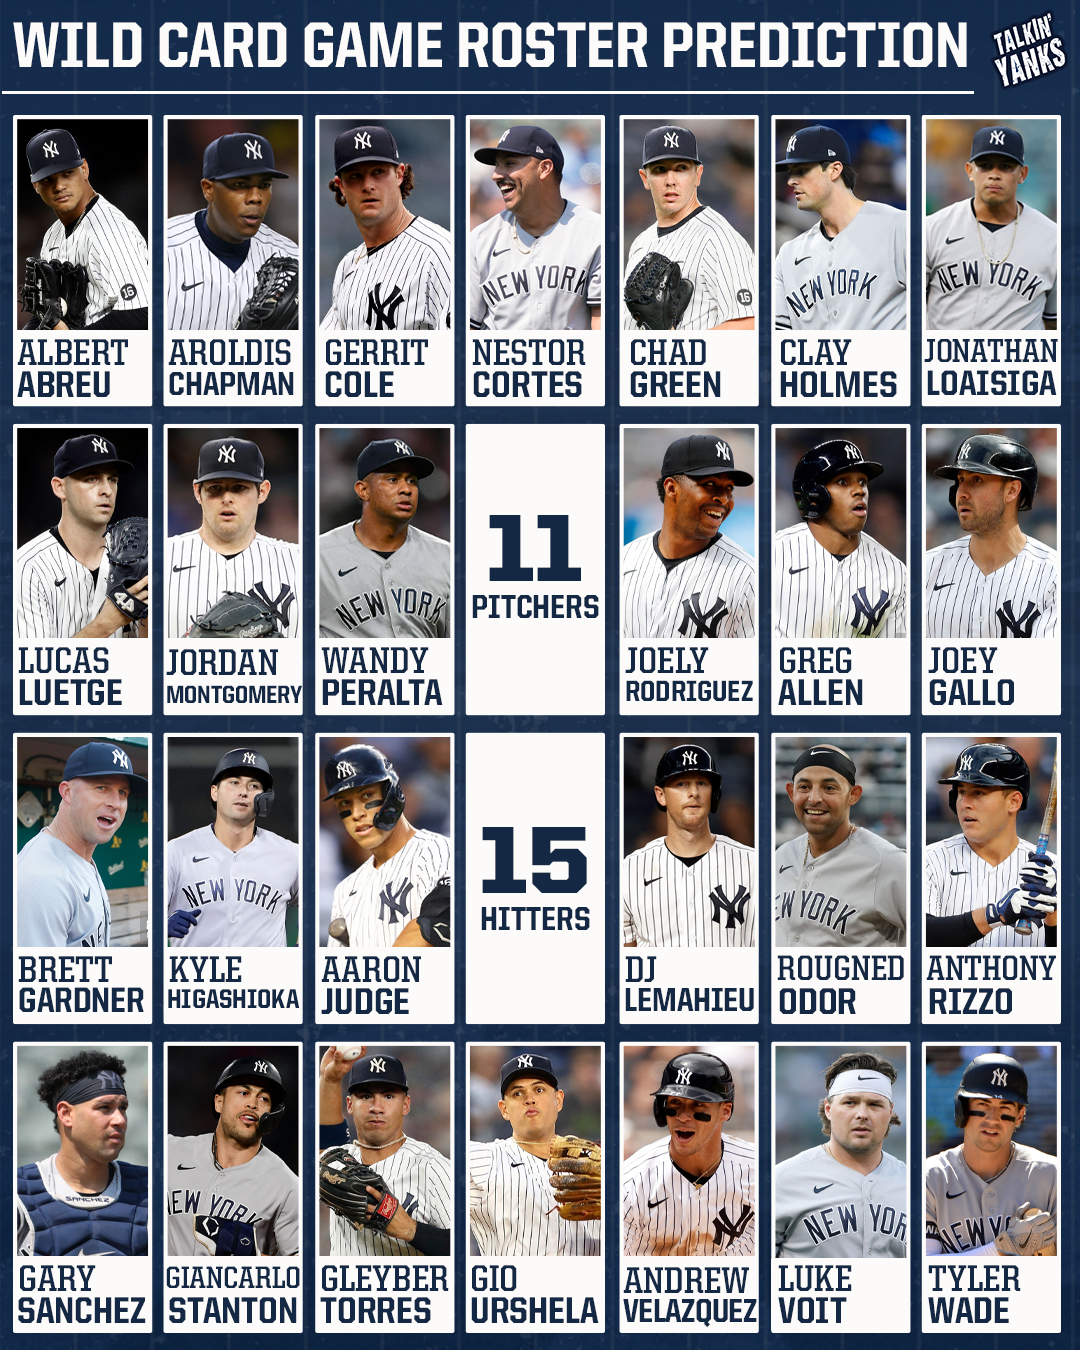 Talkin' Yanks on X: Here's what we think the roster would look